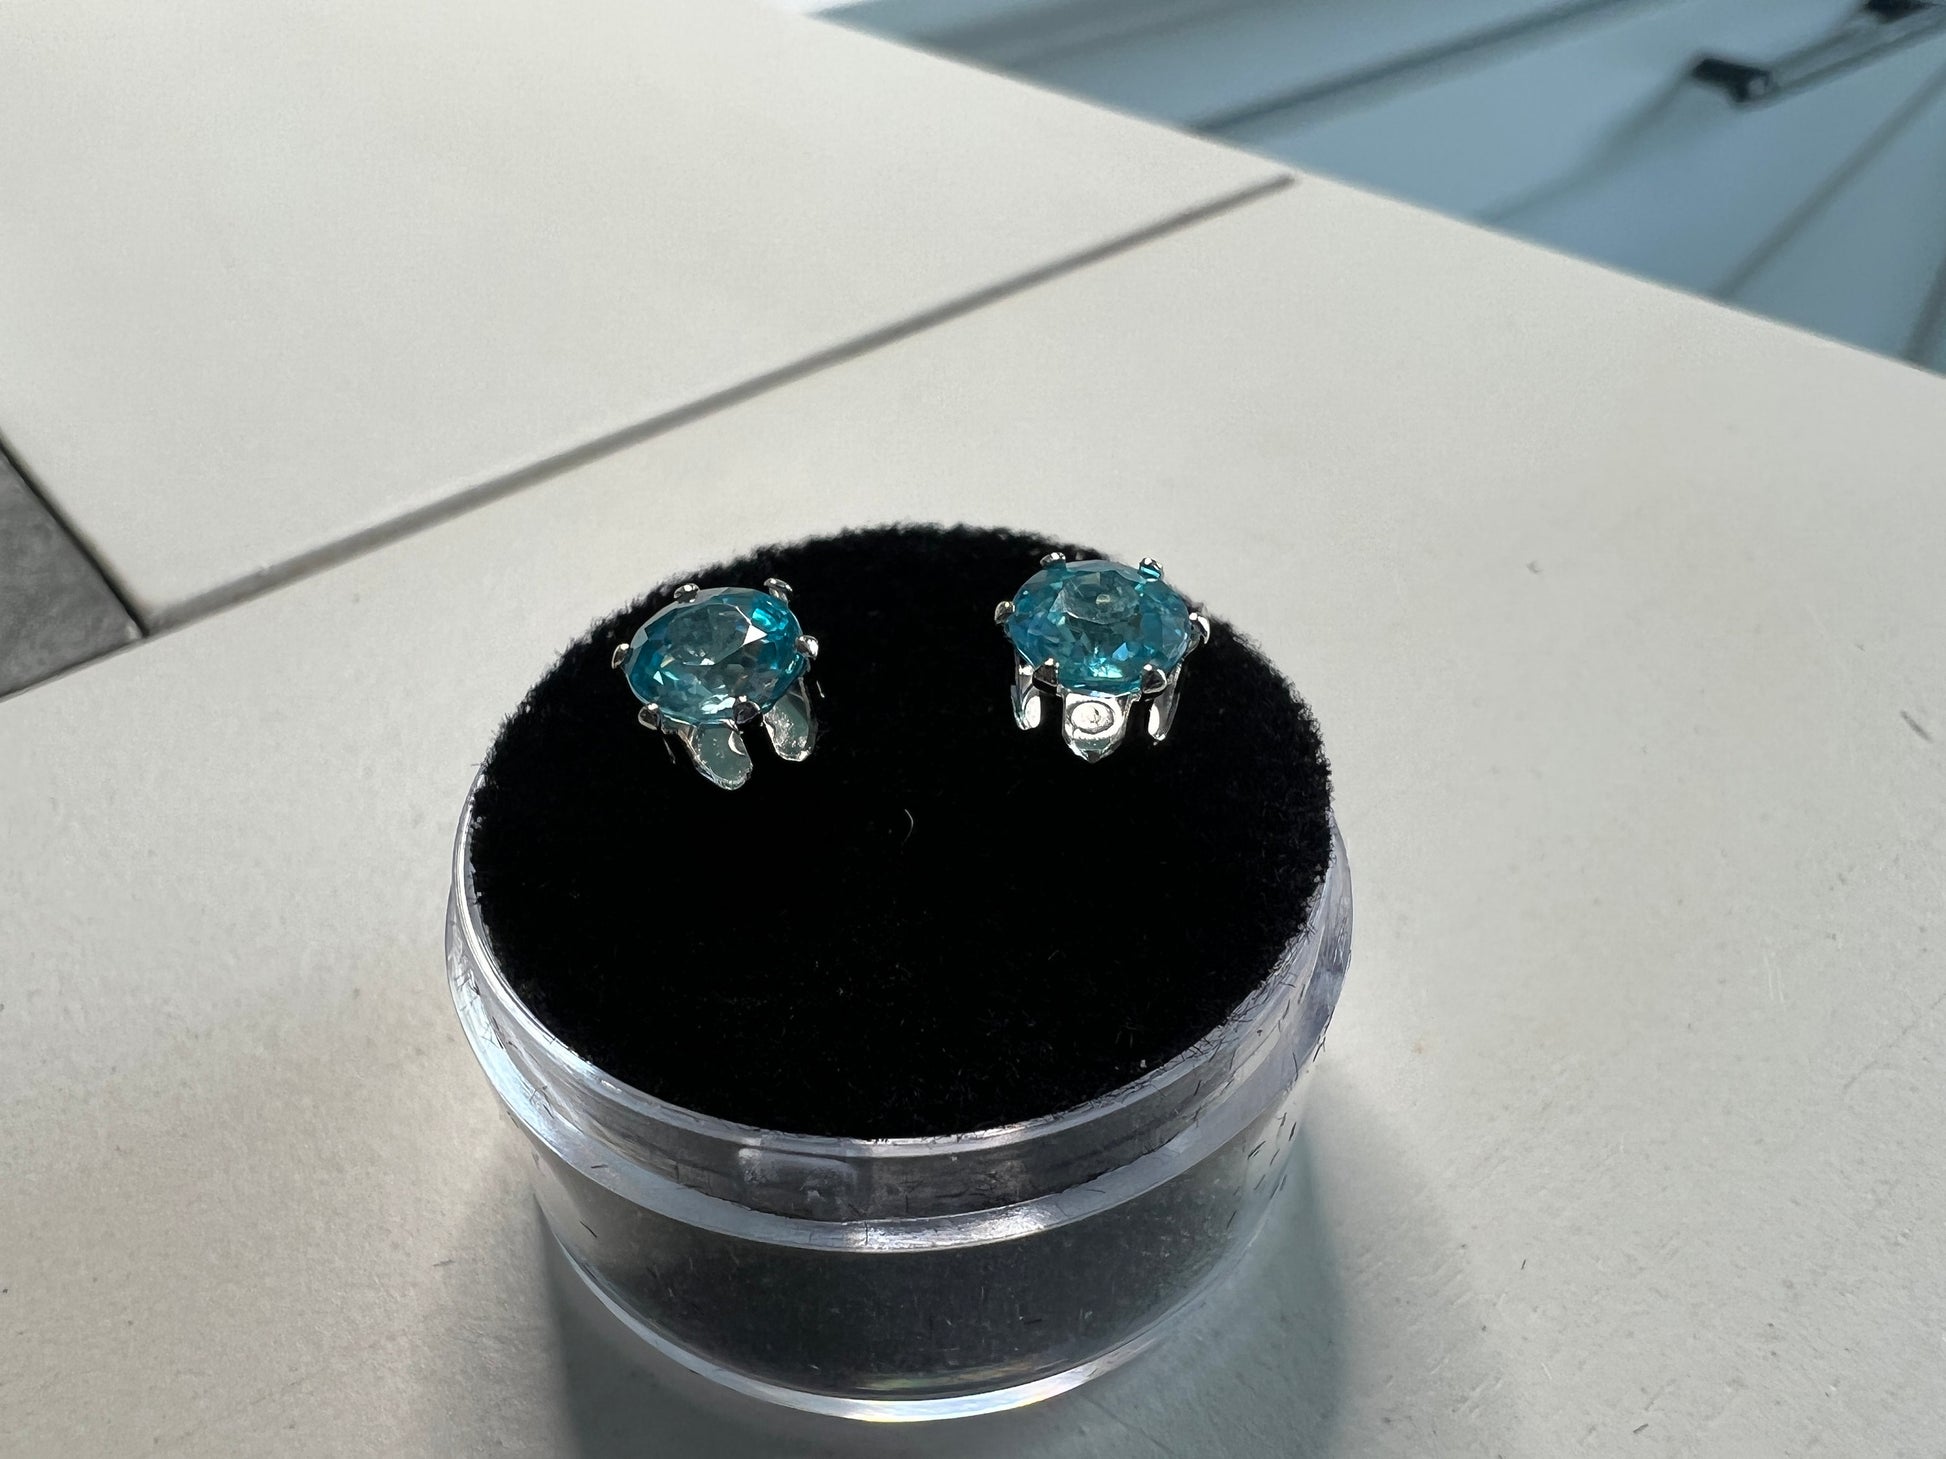 1.78 tow Cambodian Blue Zircon Earrings w/Stunning Sparkle and Color!